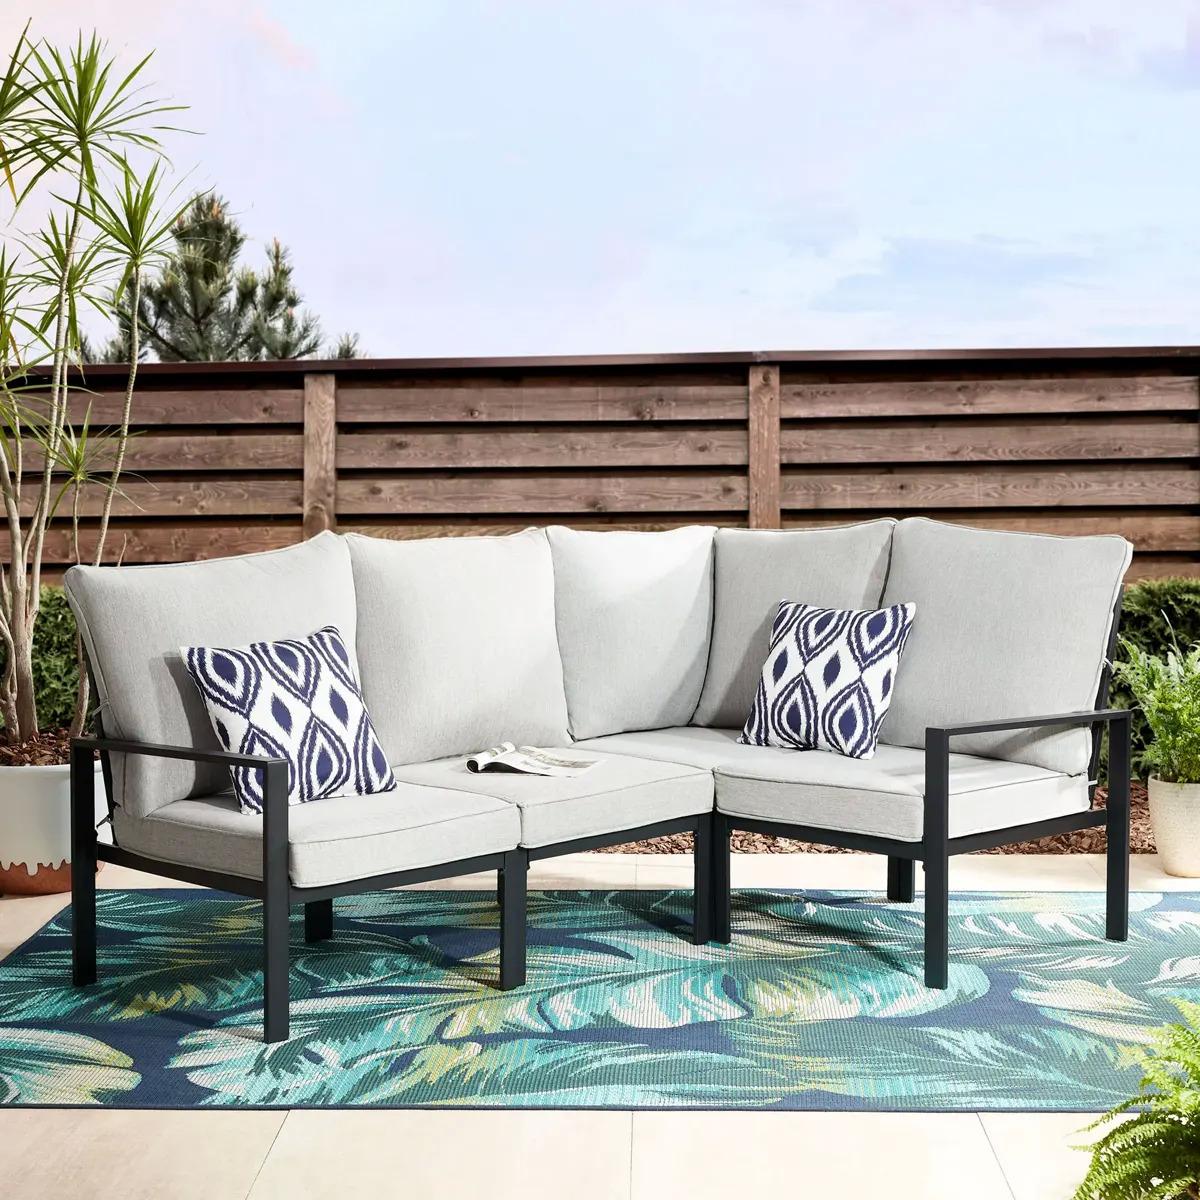 Mainstays Asher Springs Outdoor 4-Piece Sectional Sofa Set for $191 Shipped